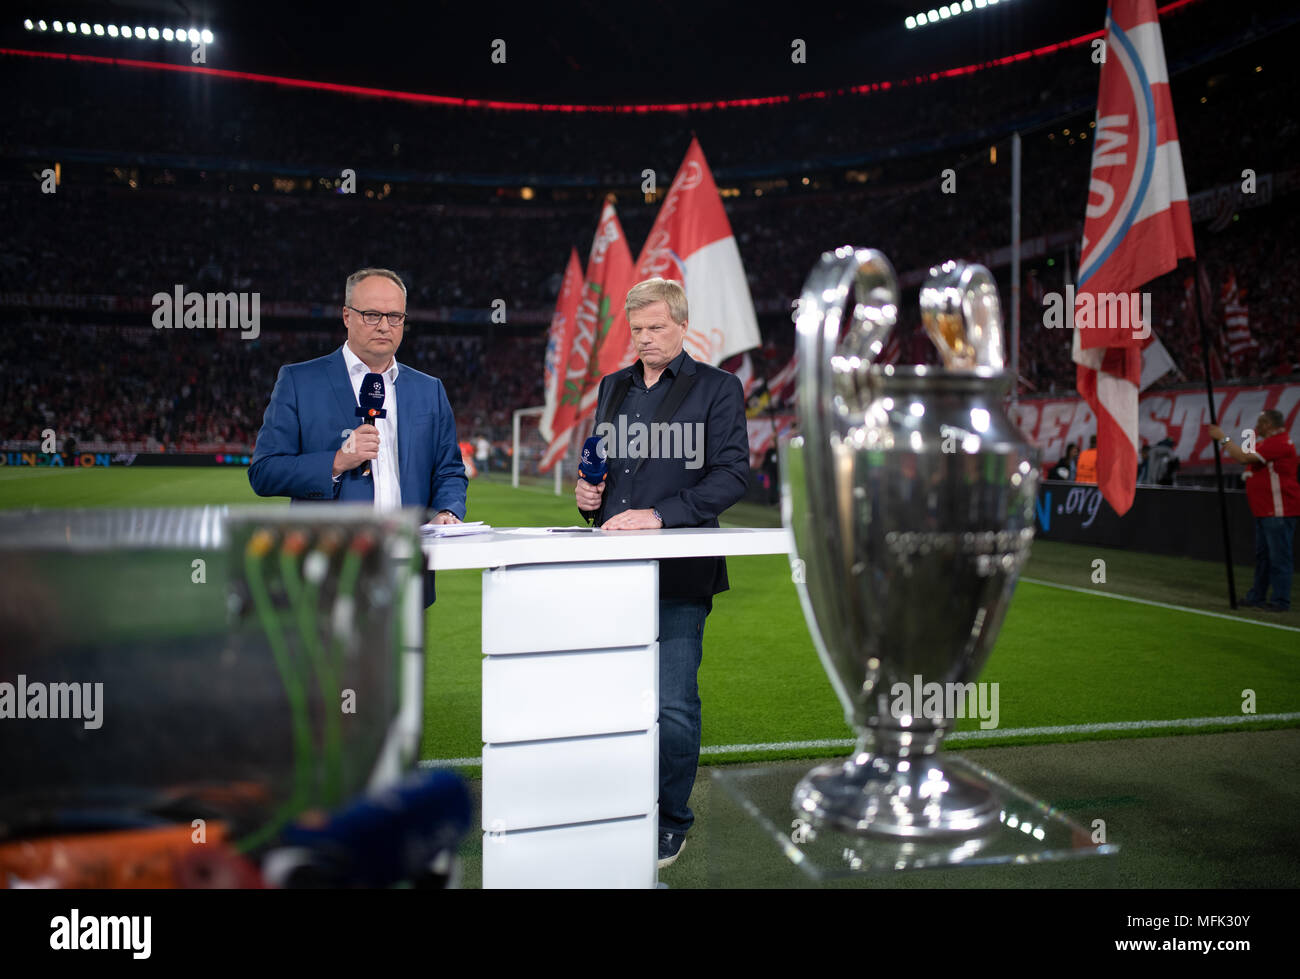 Oliver kahn r hi-res stock photography and images - Alamy